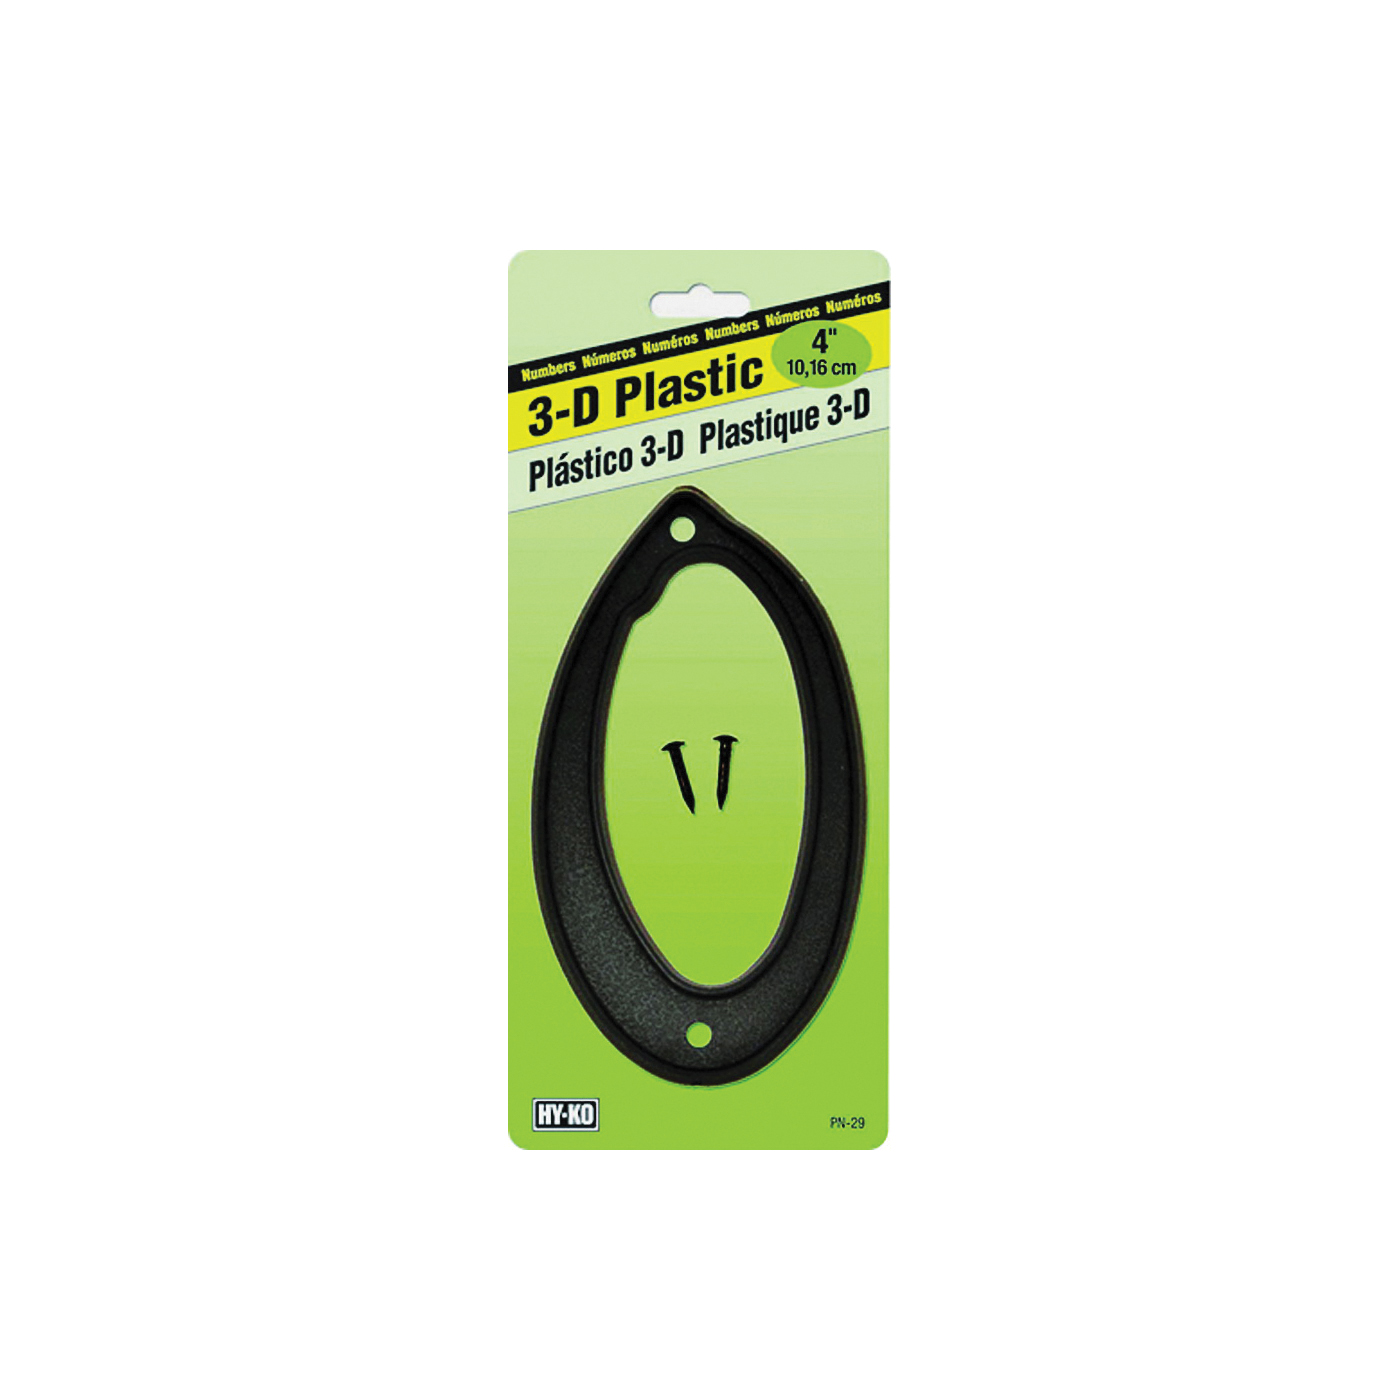 PN-29/0 House Number, Character: 0, 4 in H Character, Black Character, Plastic